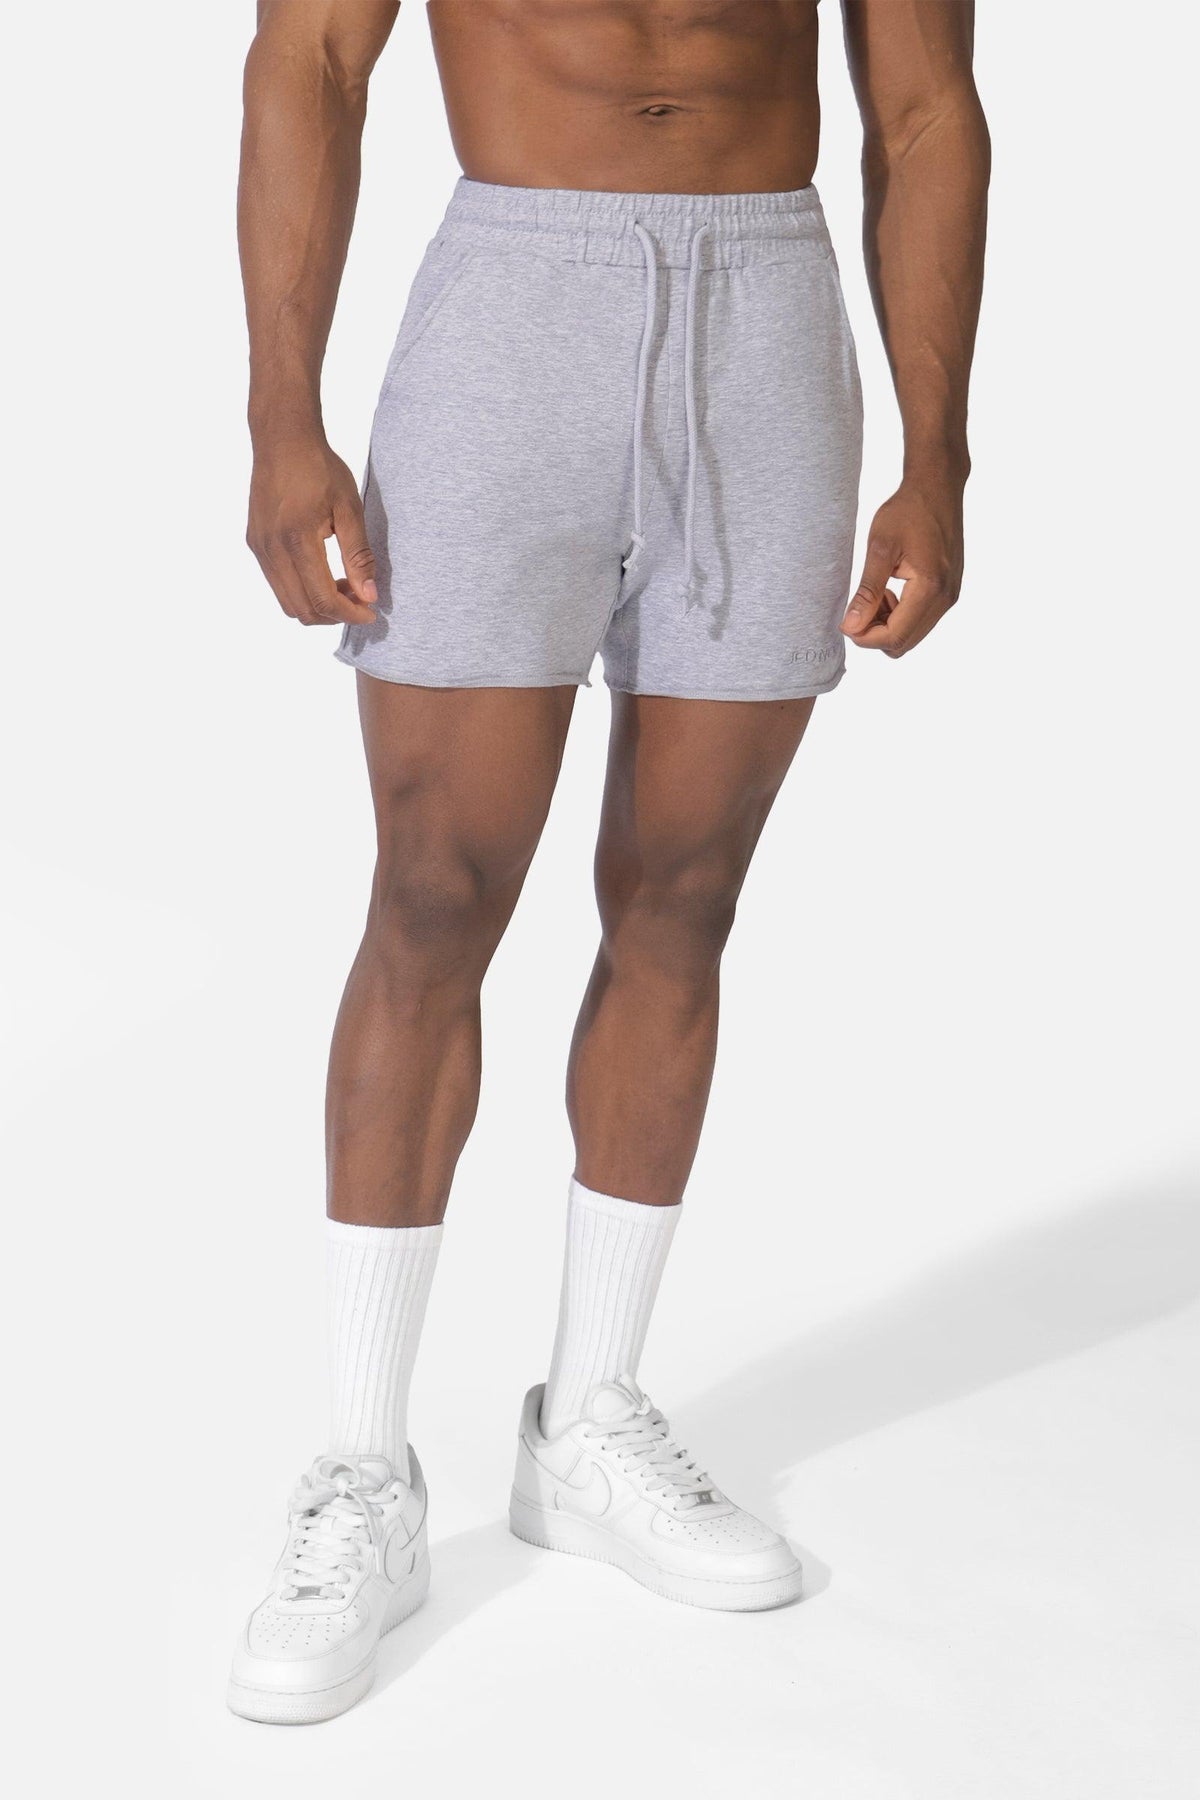 All in Motion Men's Trail Shorts 6 